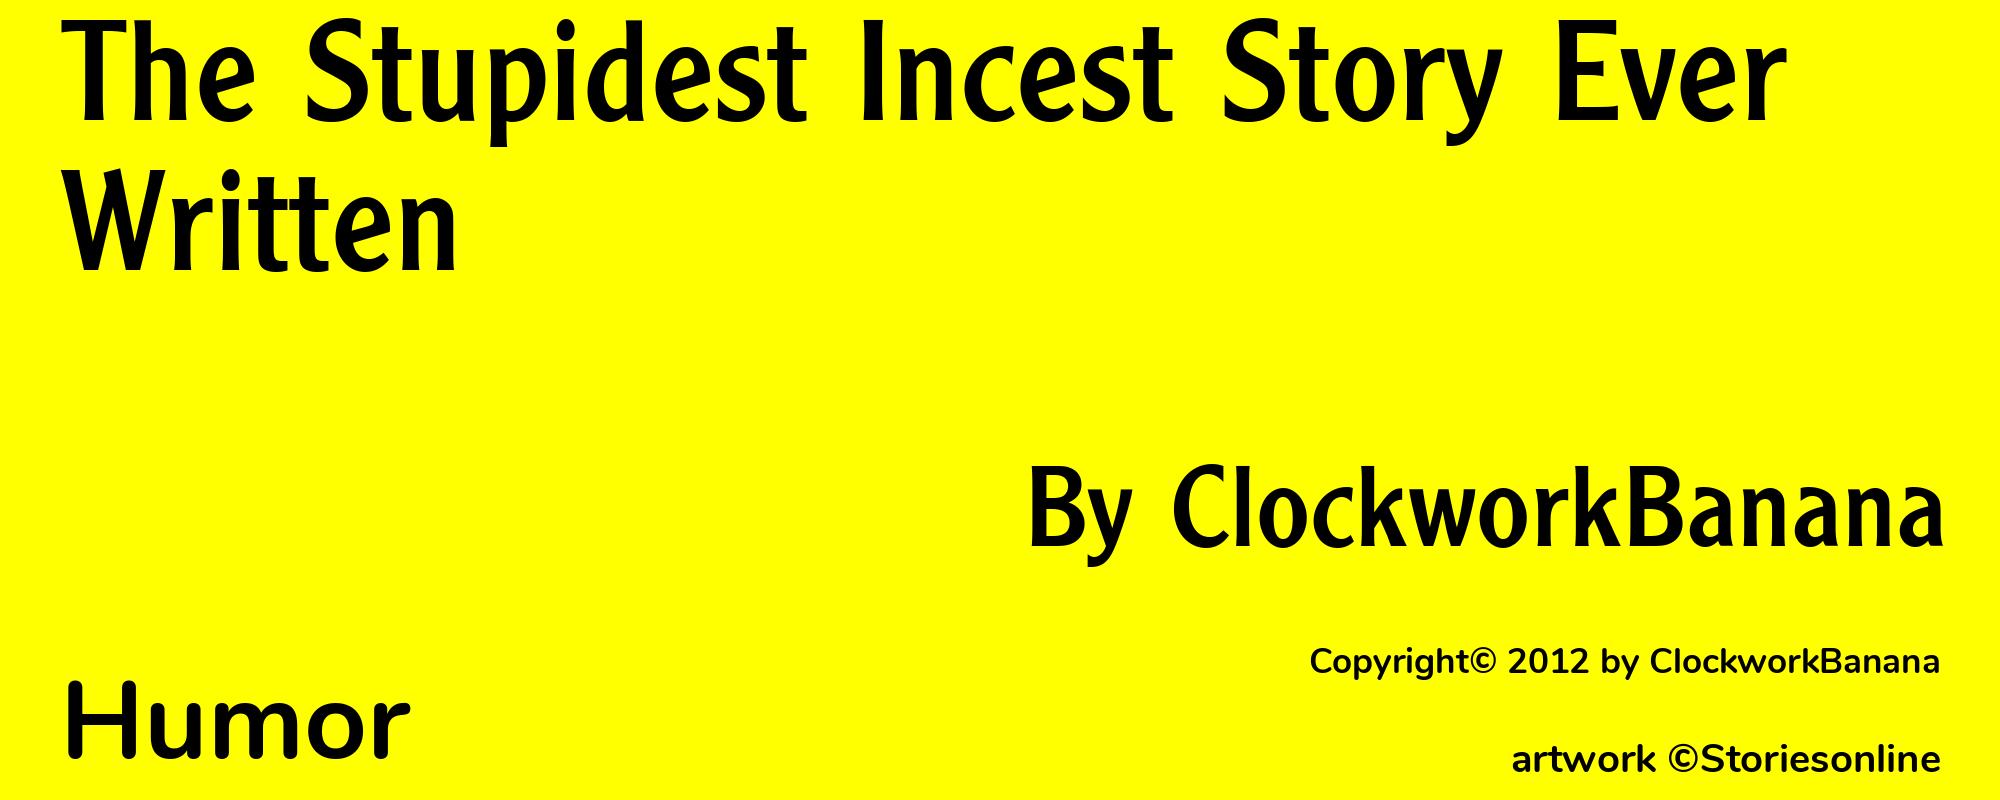 The Stupidest Incest Story Ever Written - Cover